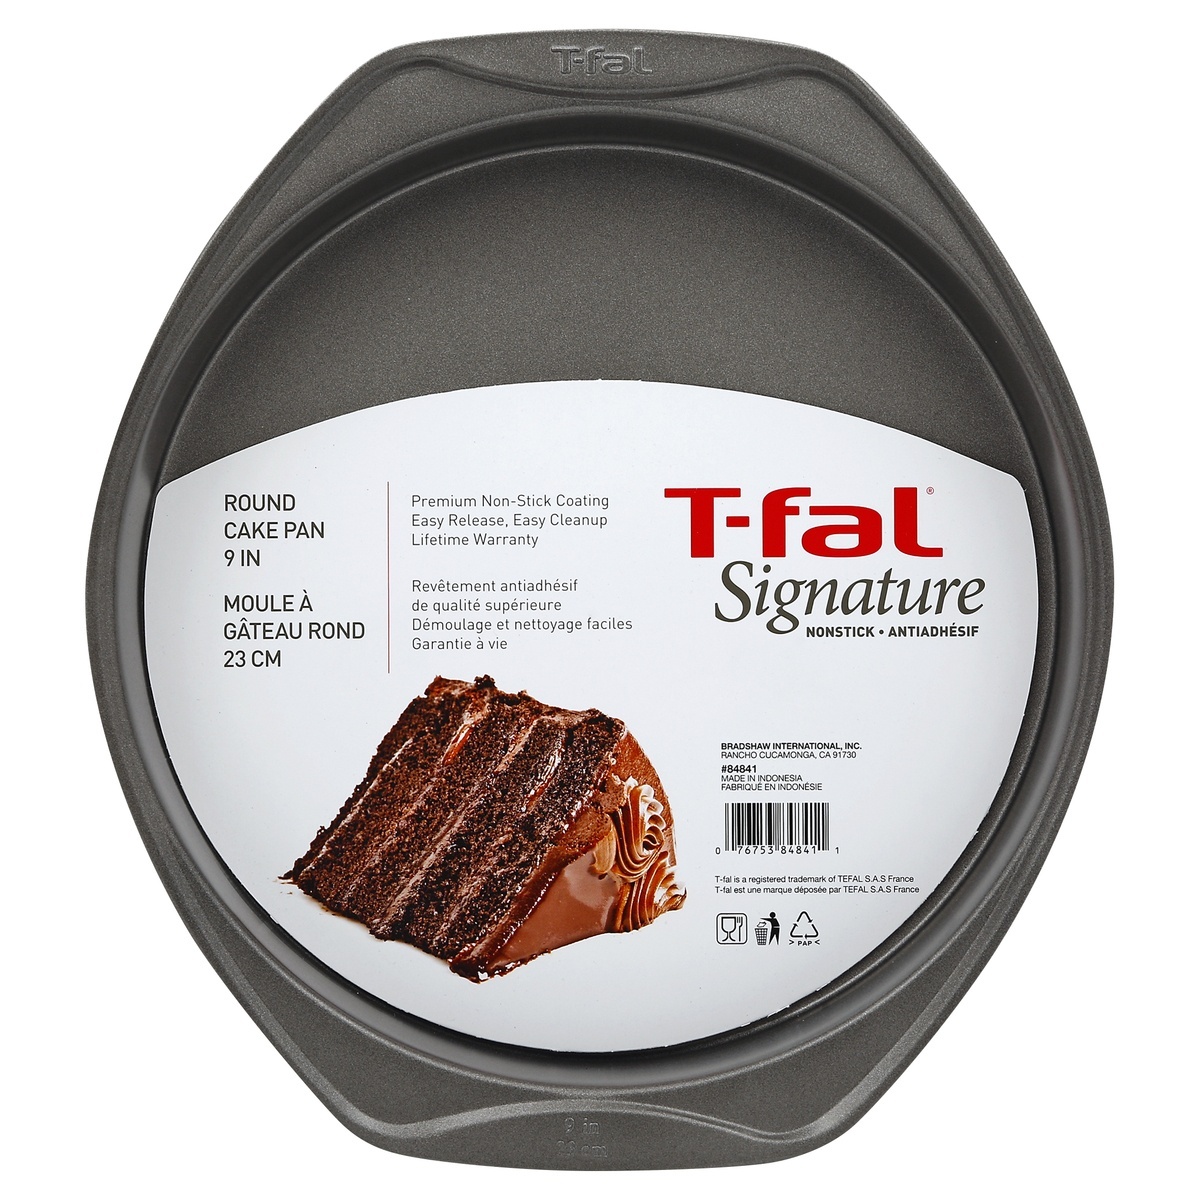 slide 1 of 3, T-fal Signature Ns Cake Round 9in - Each, 1 ct